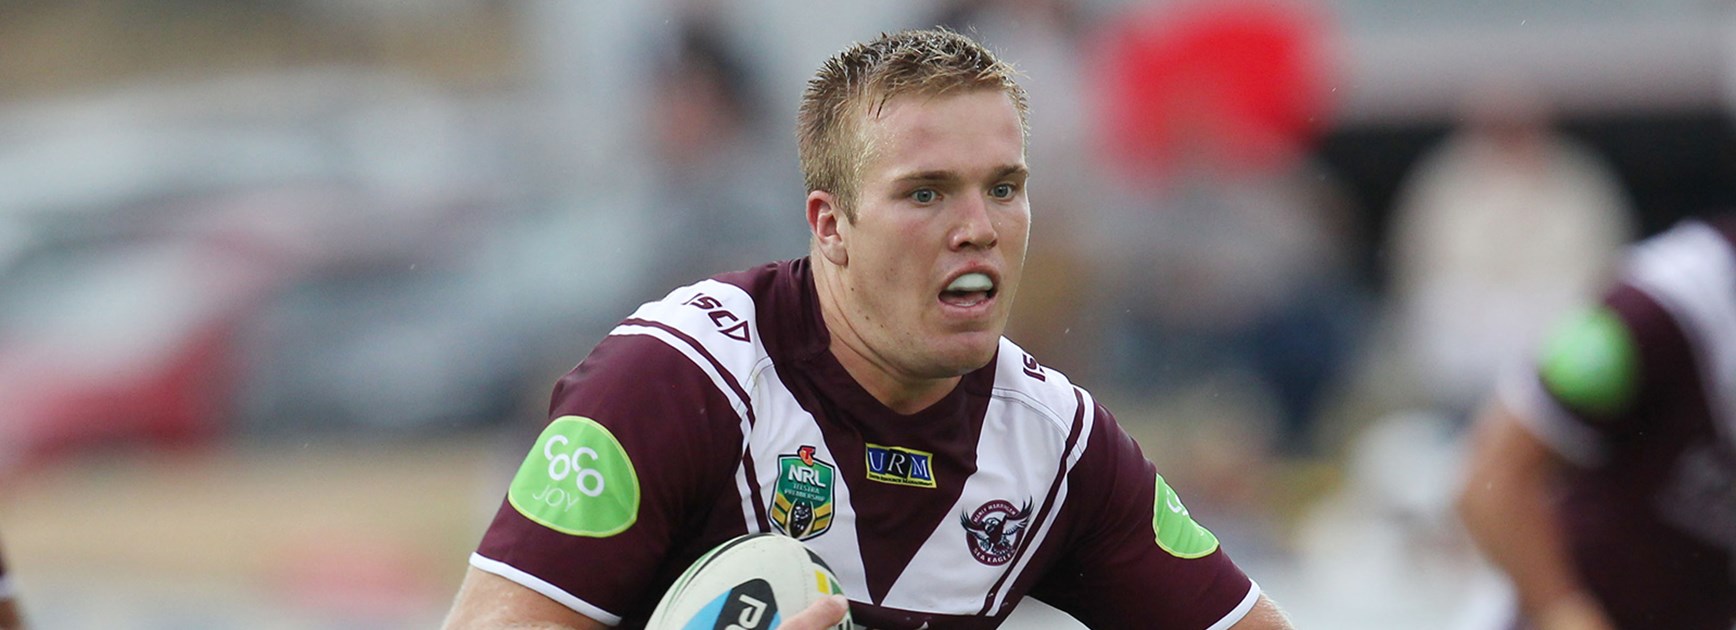 Sea Eagles forward Jake Trbojevic is completing a Bachelor of Sports and Exercise Management at UTS.